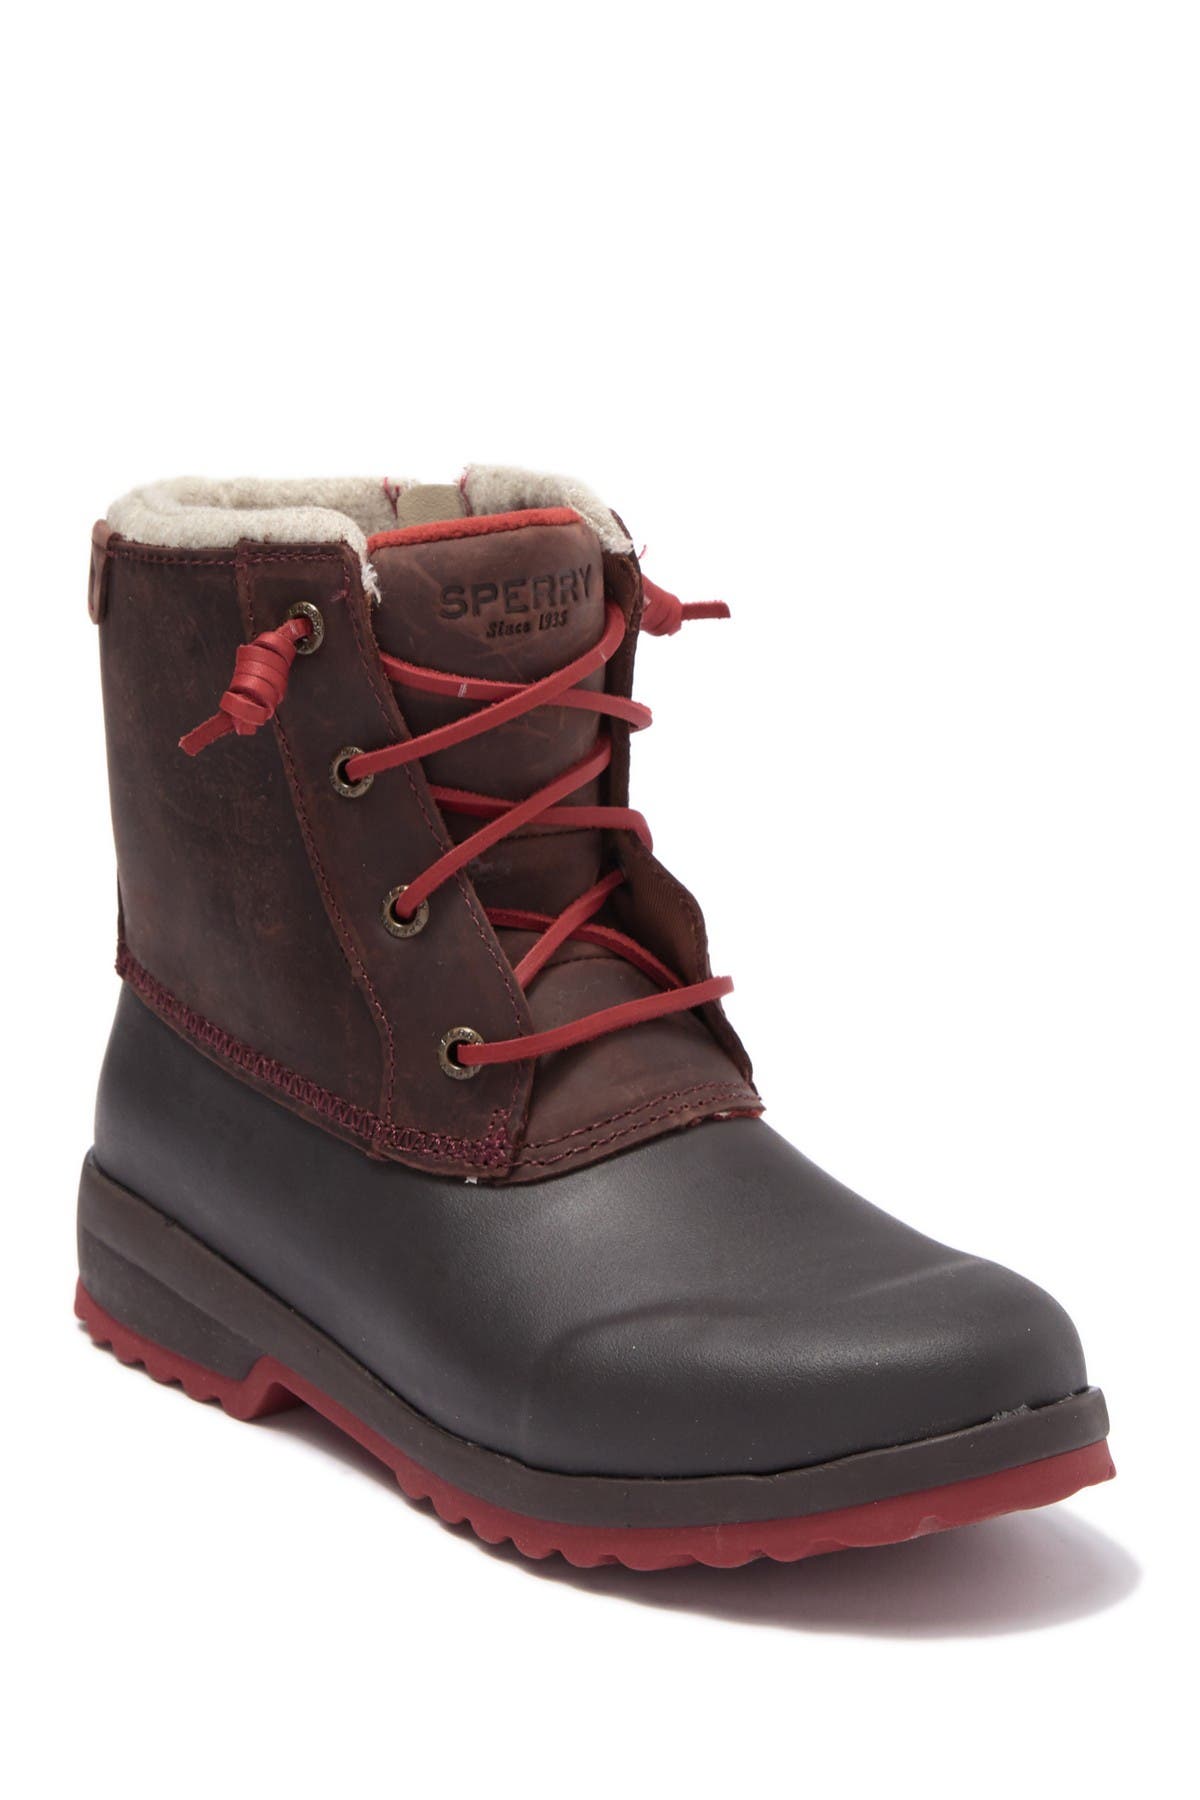 sperry boots maritime repel